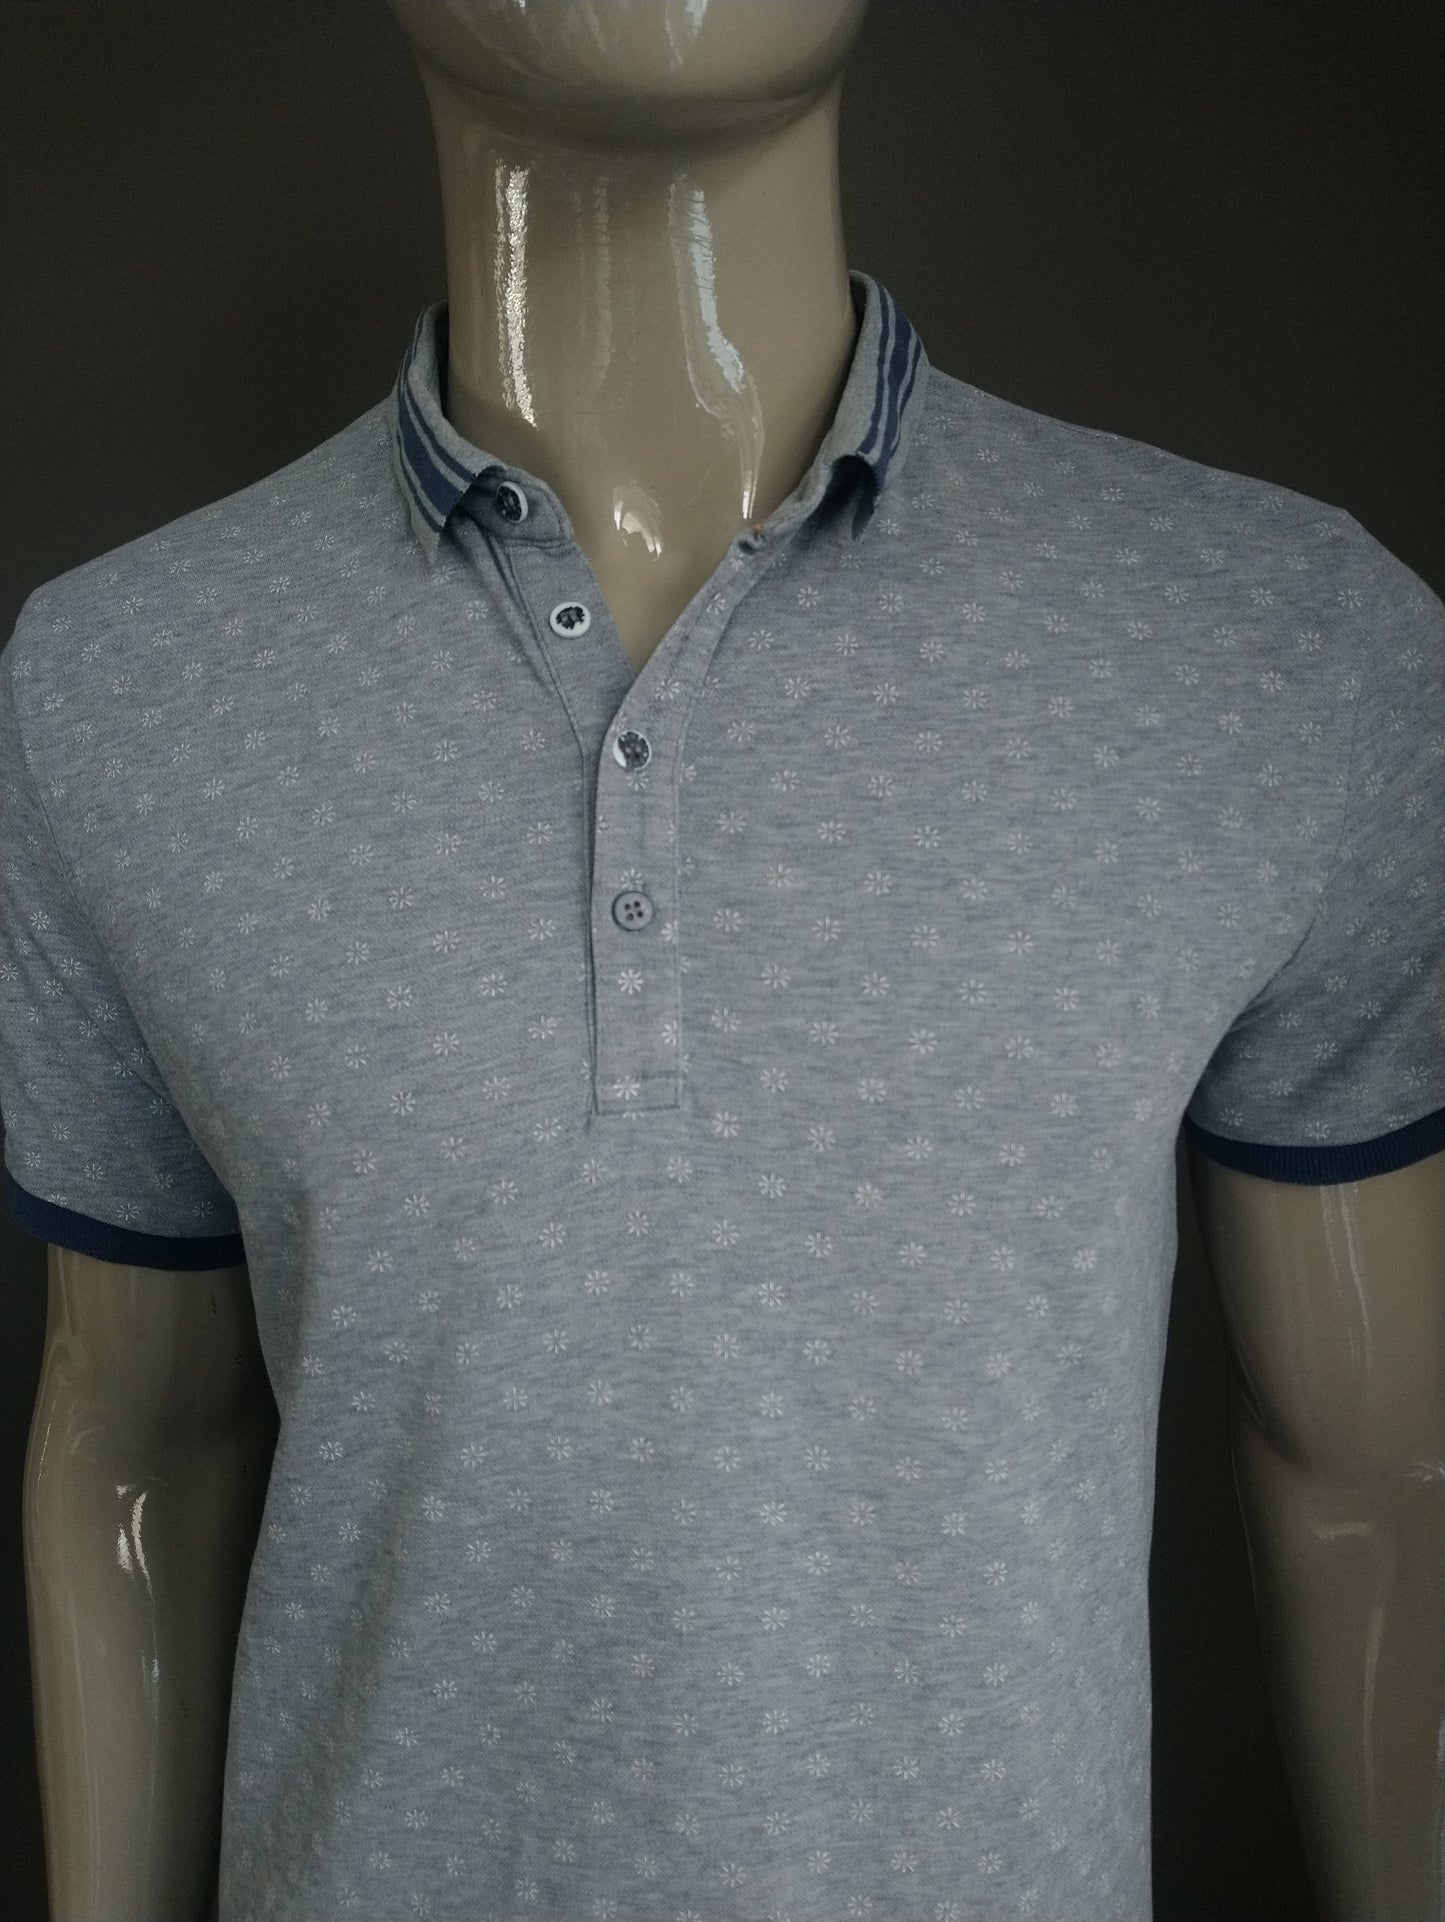 Blue Industry Polo. Gray white print. Size XL.